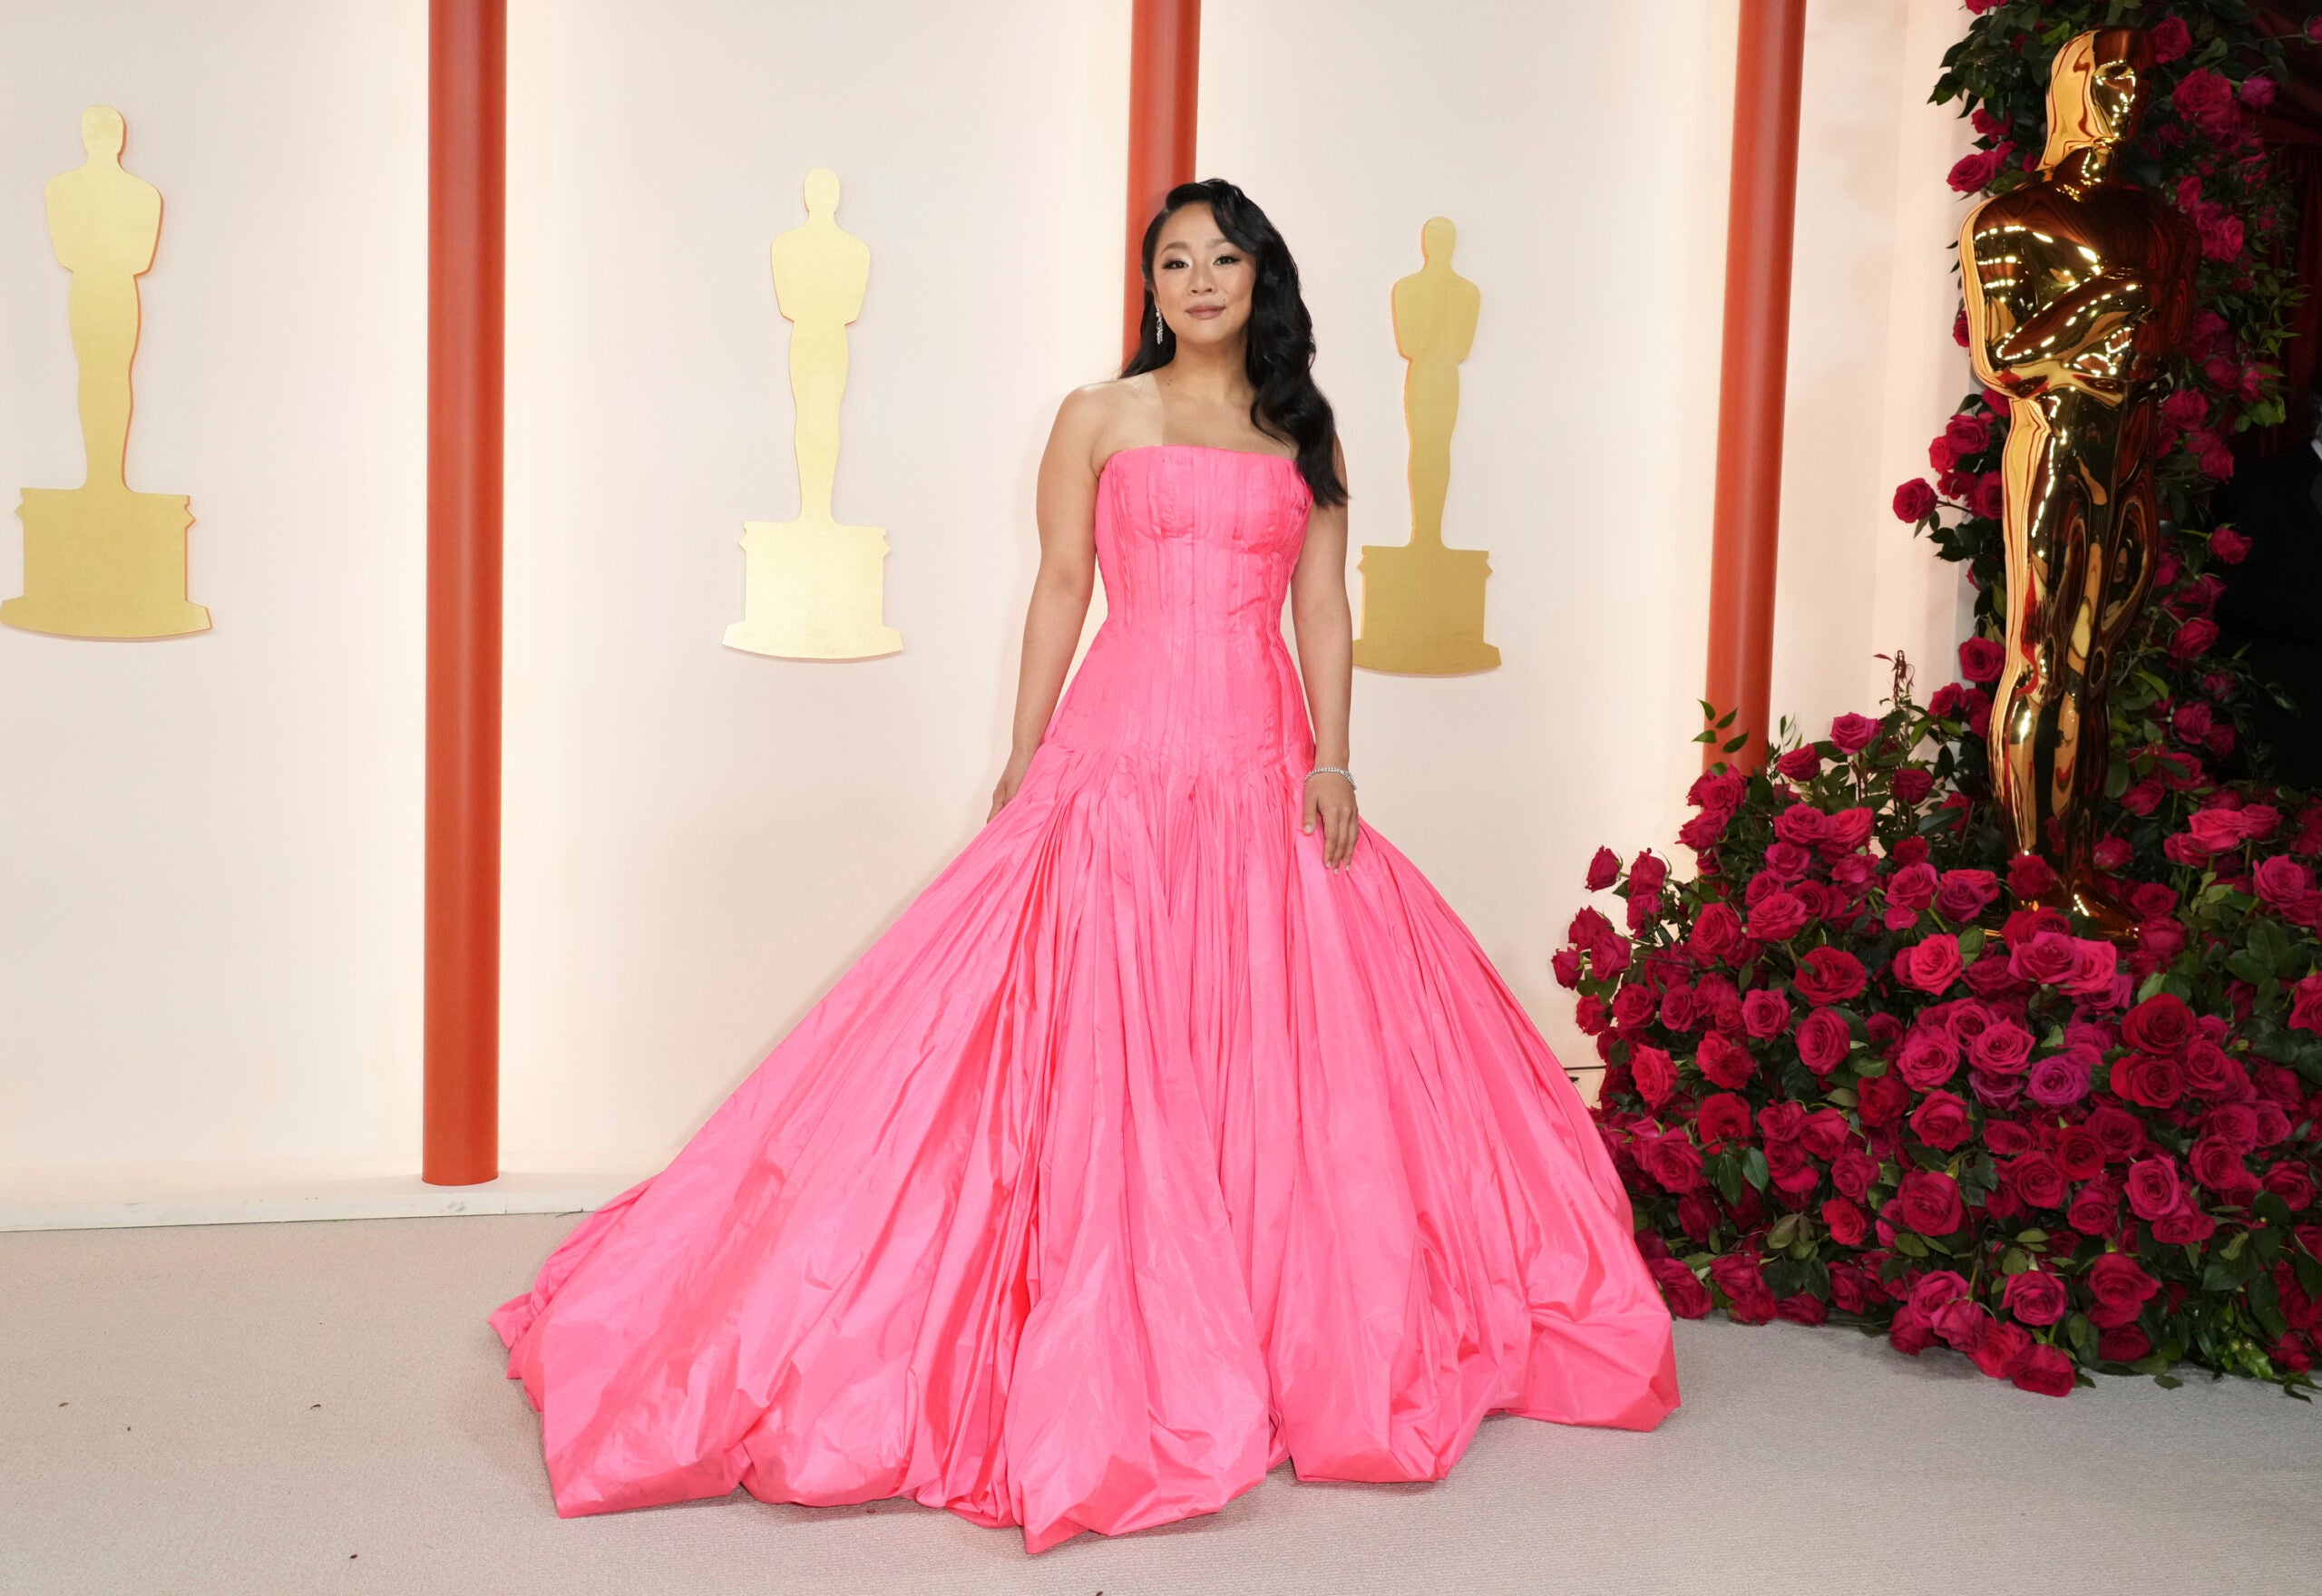 23 photos of stars on the red carpet at the 2023 Oscars